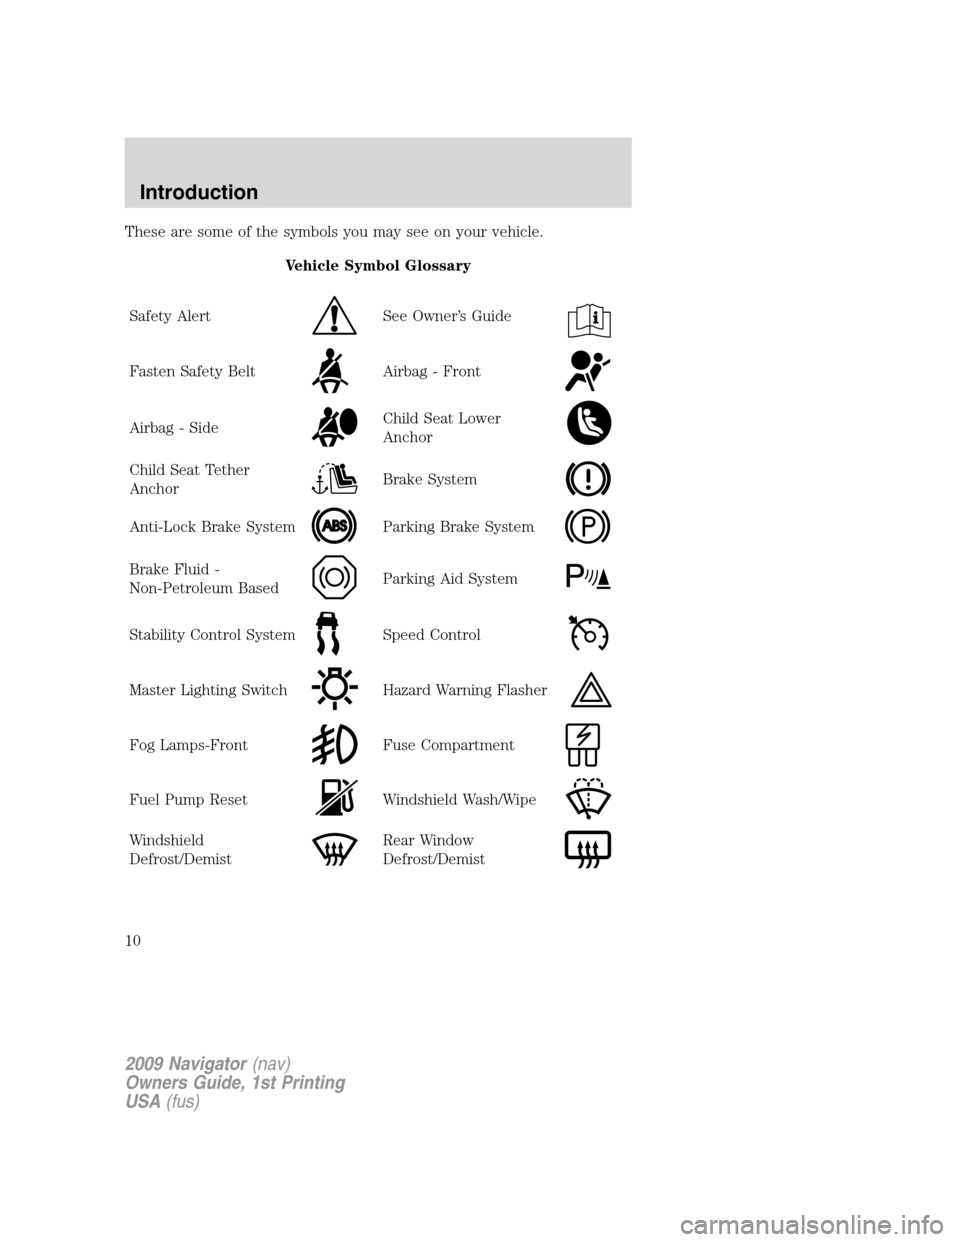 LINCOLN NAVIGATOR 2009  Owners Manual These are some of the symbols you may see on your vehicle.
Vehicle Symbol Glossary
Safety Alert
See Owner’s Guide
Fasten Safety BeltAirbag - Front
Airbag - SideChild Seat Lower
Anchor
Child Seat Tet